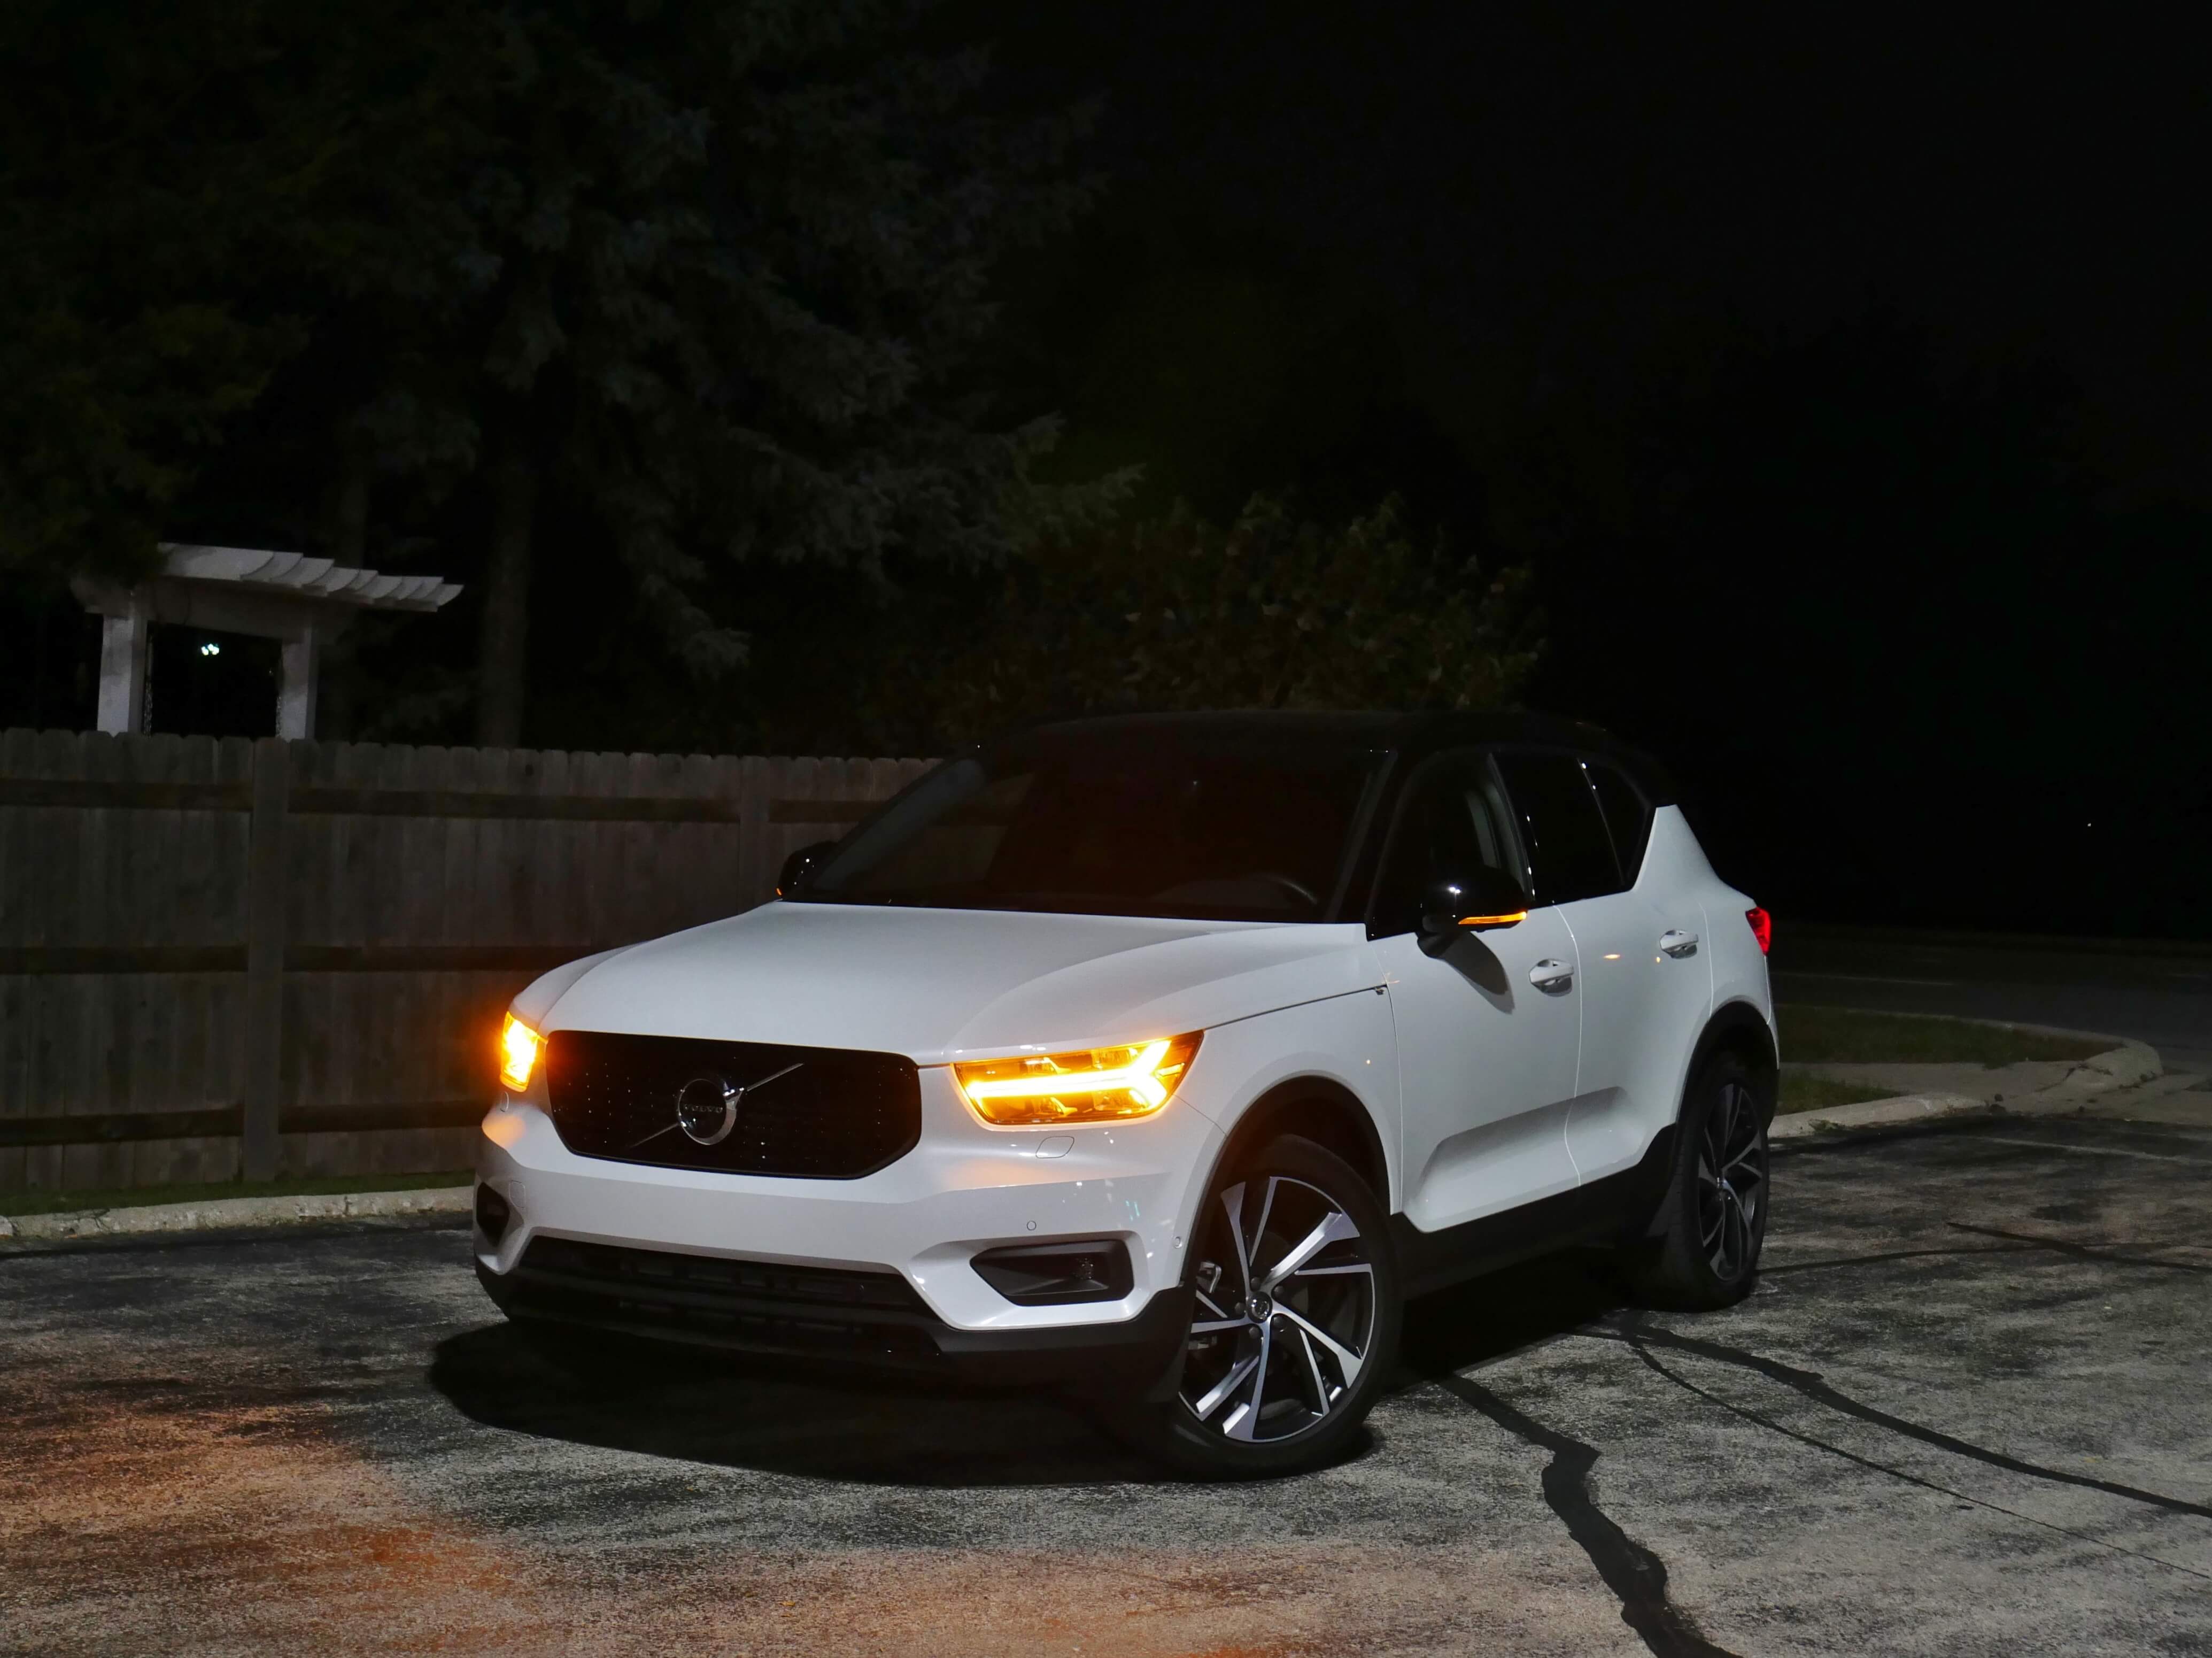 2019 Volvo XC40 T5 R-Design: Thor's Hammer LEDs alter from white DRLs to amber directionals